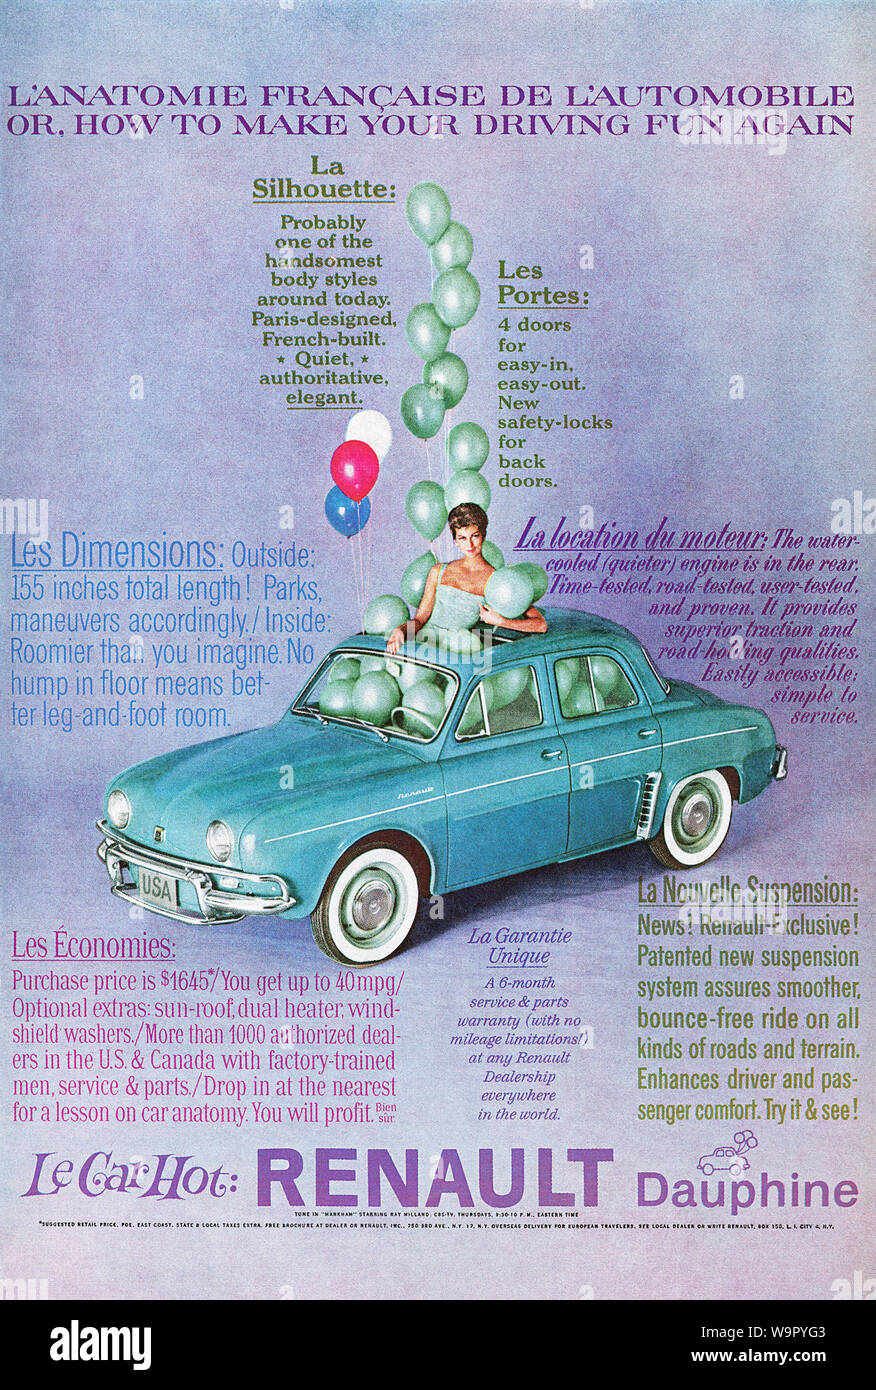 1960 U.S. advertisement for the Renault Dauphine automobile. Stock Photo